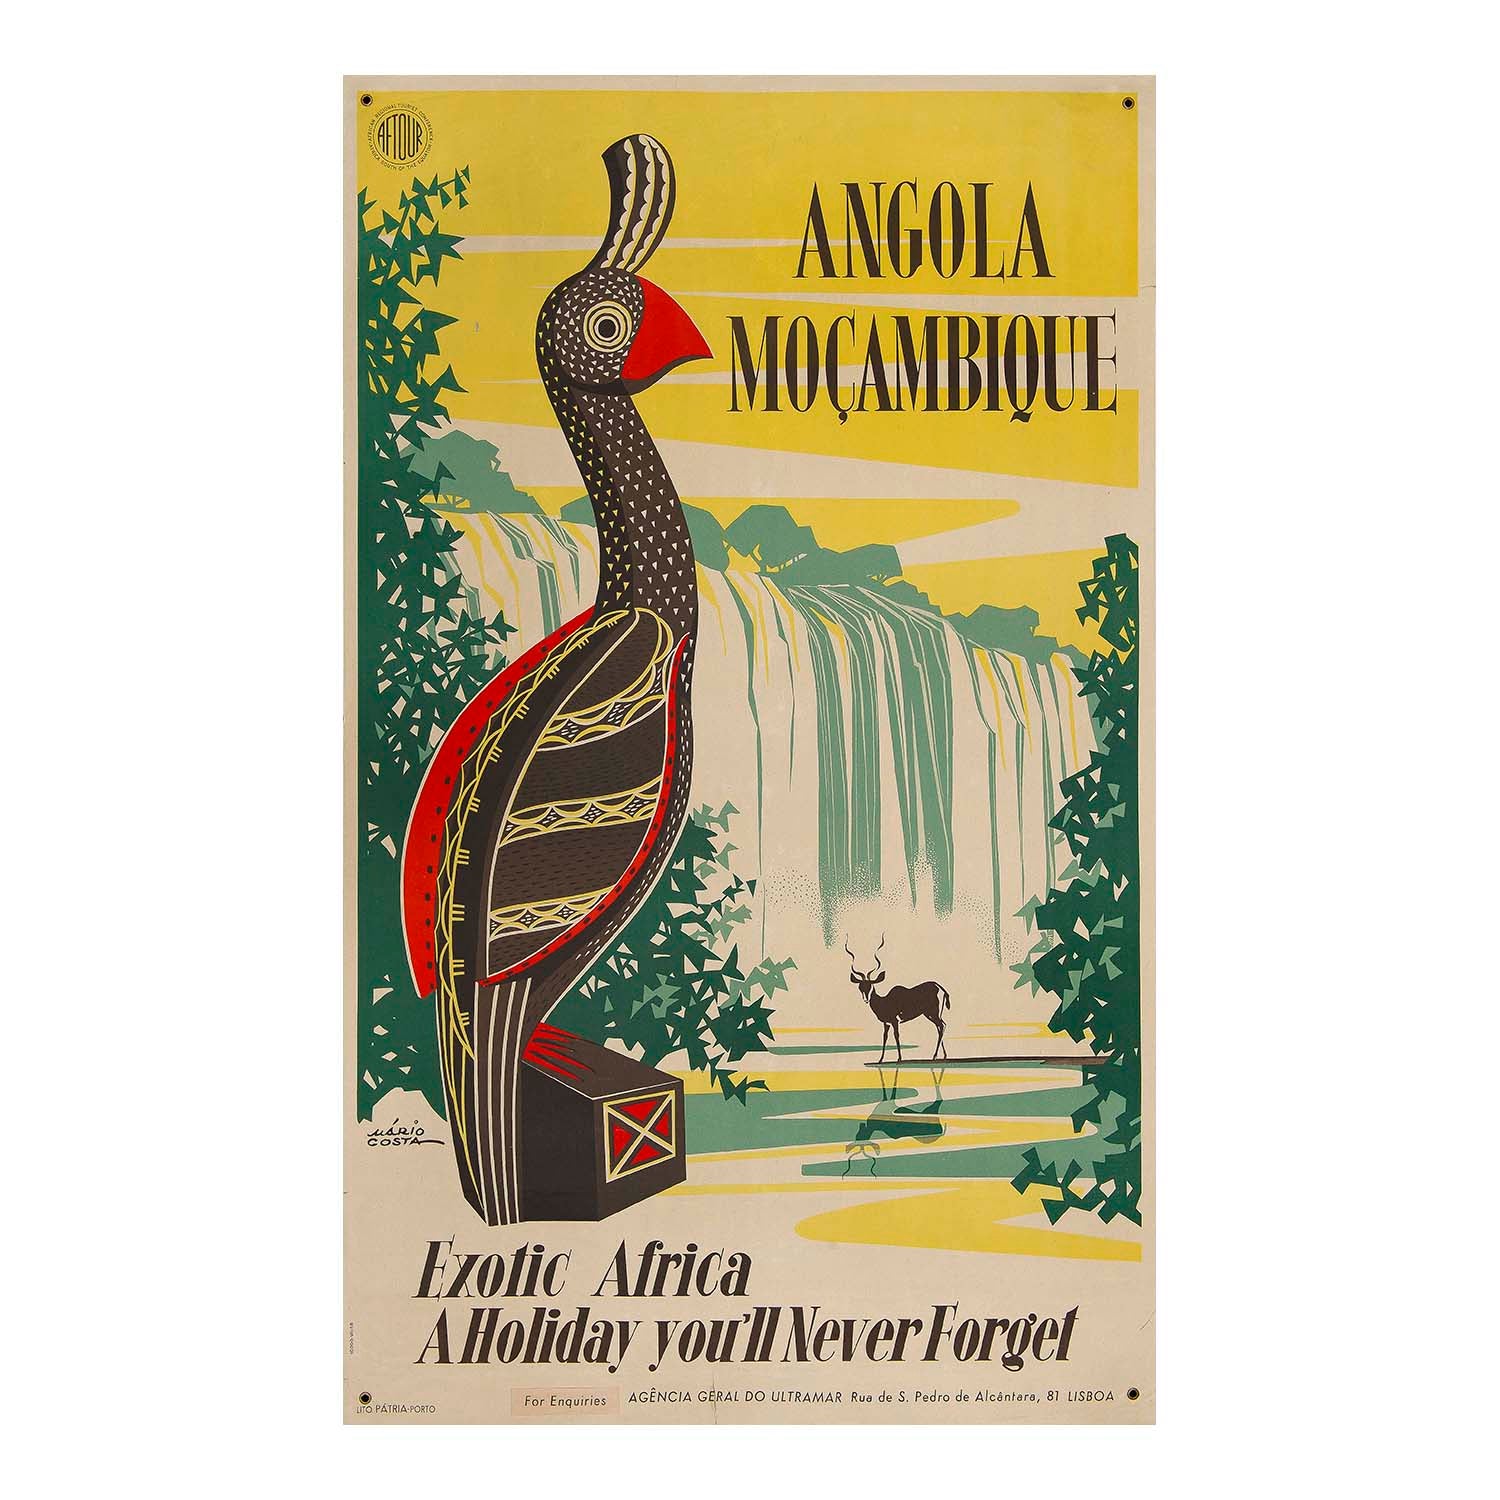 Original travel poster Angola and Mozambique, designed by Mário Costa 1958. The design features an exotic African bird (possibly a Barbet) with waterfall behind